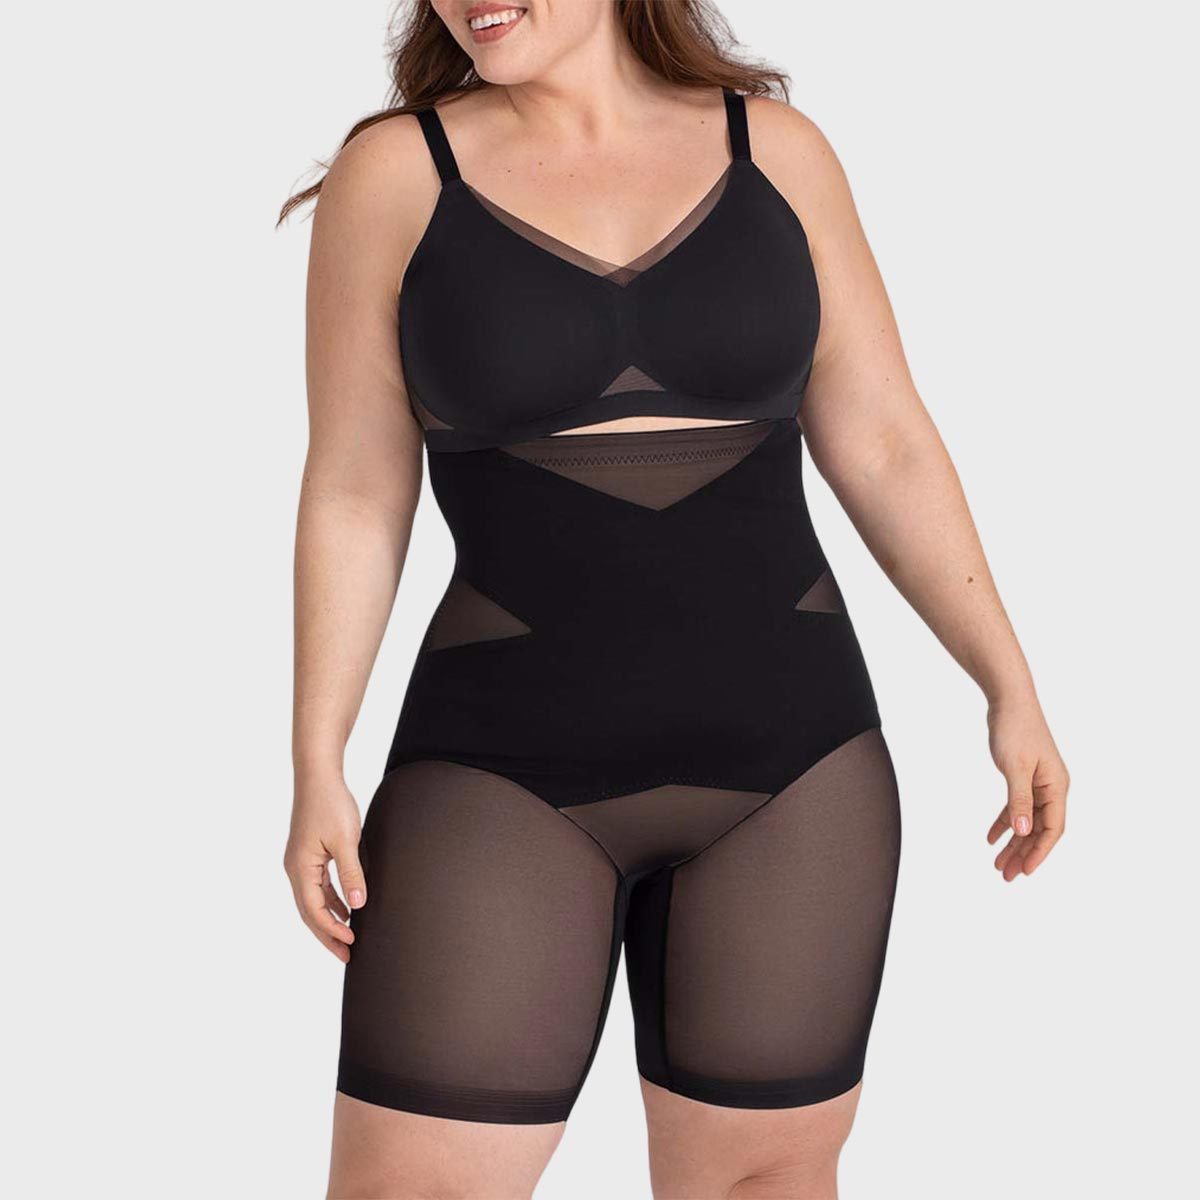 THE BEST PLUS SIZE COMPRESSION SHAPEWEAR FOR DRESSES & SKIRTS 